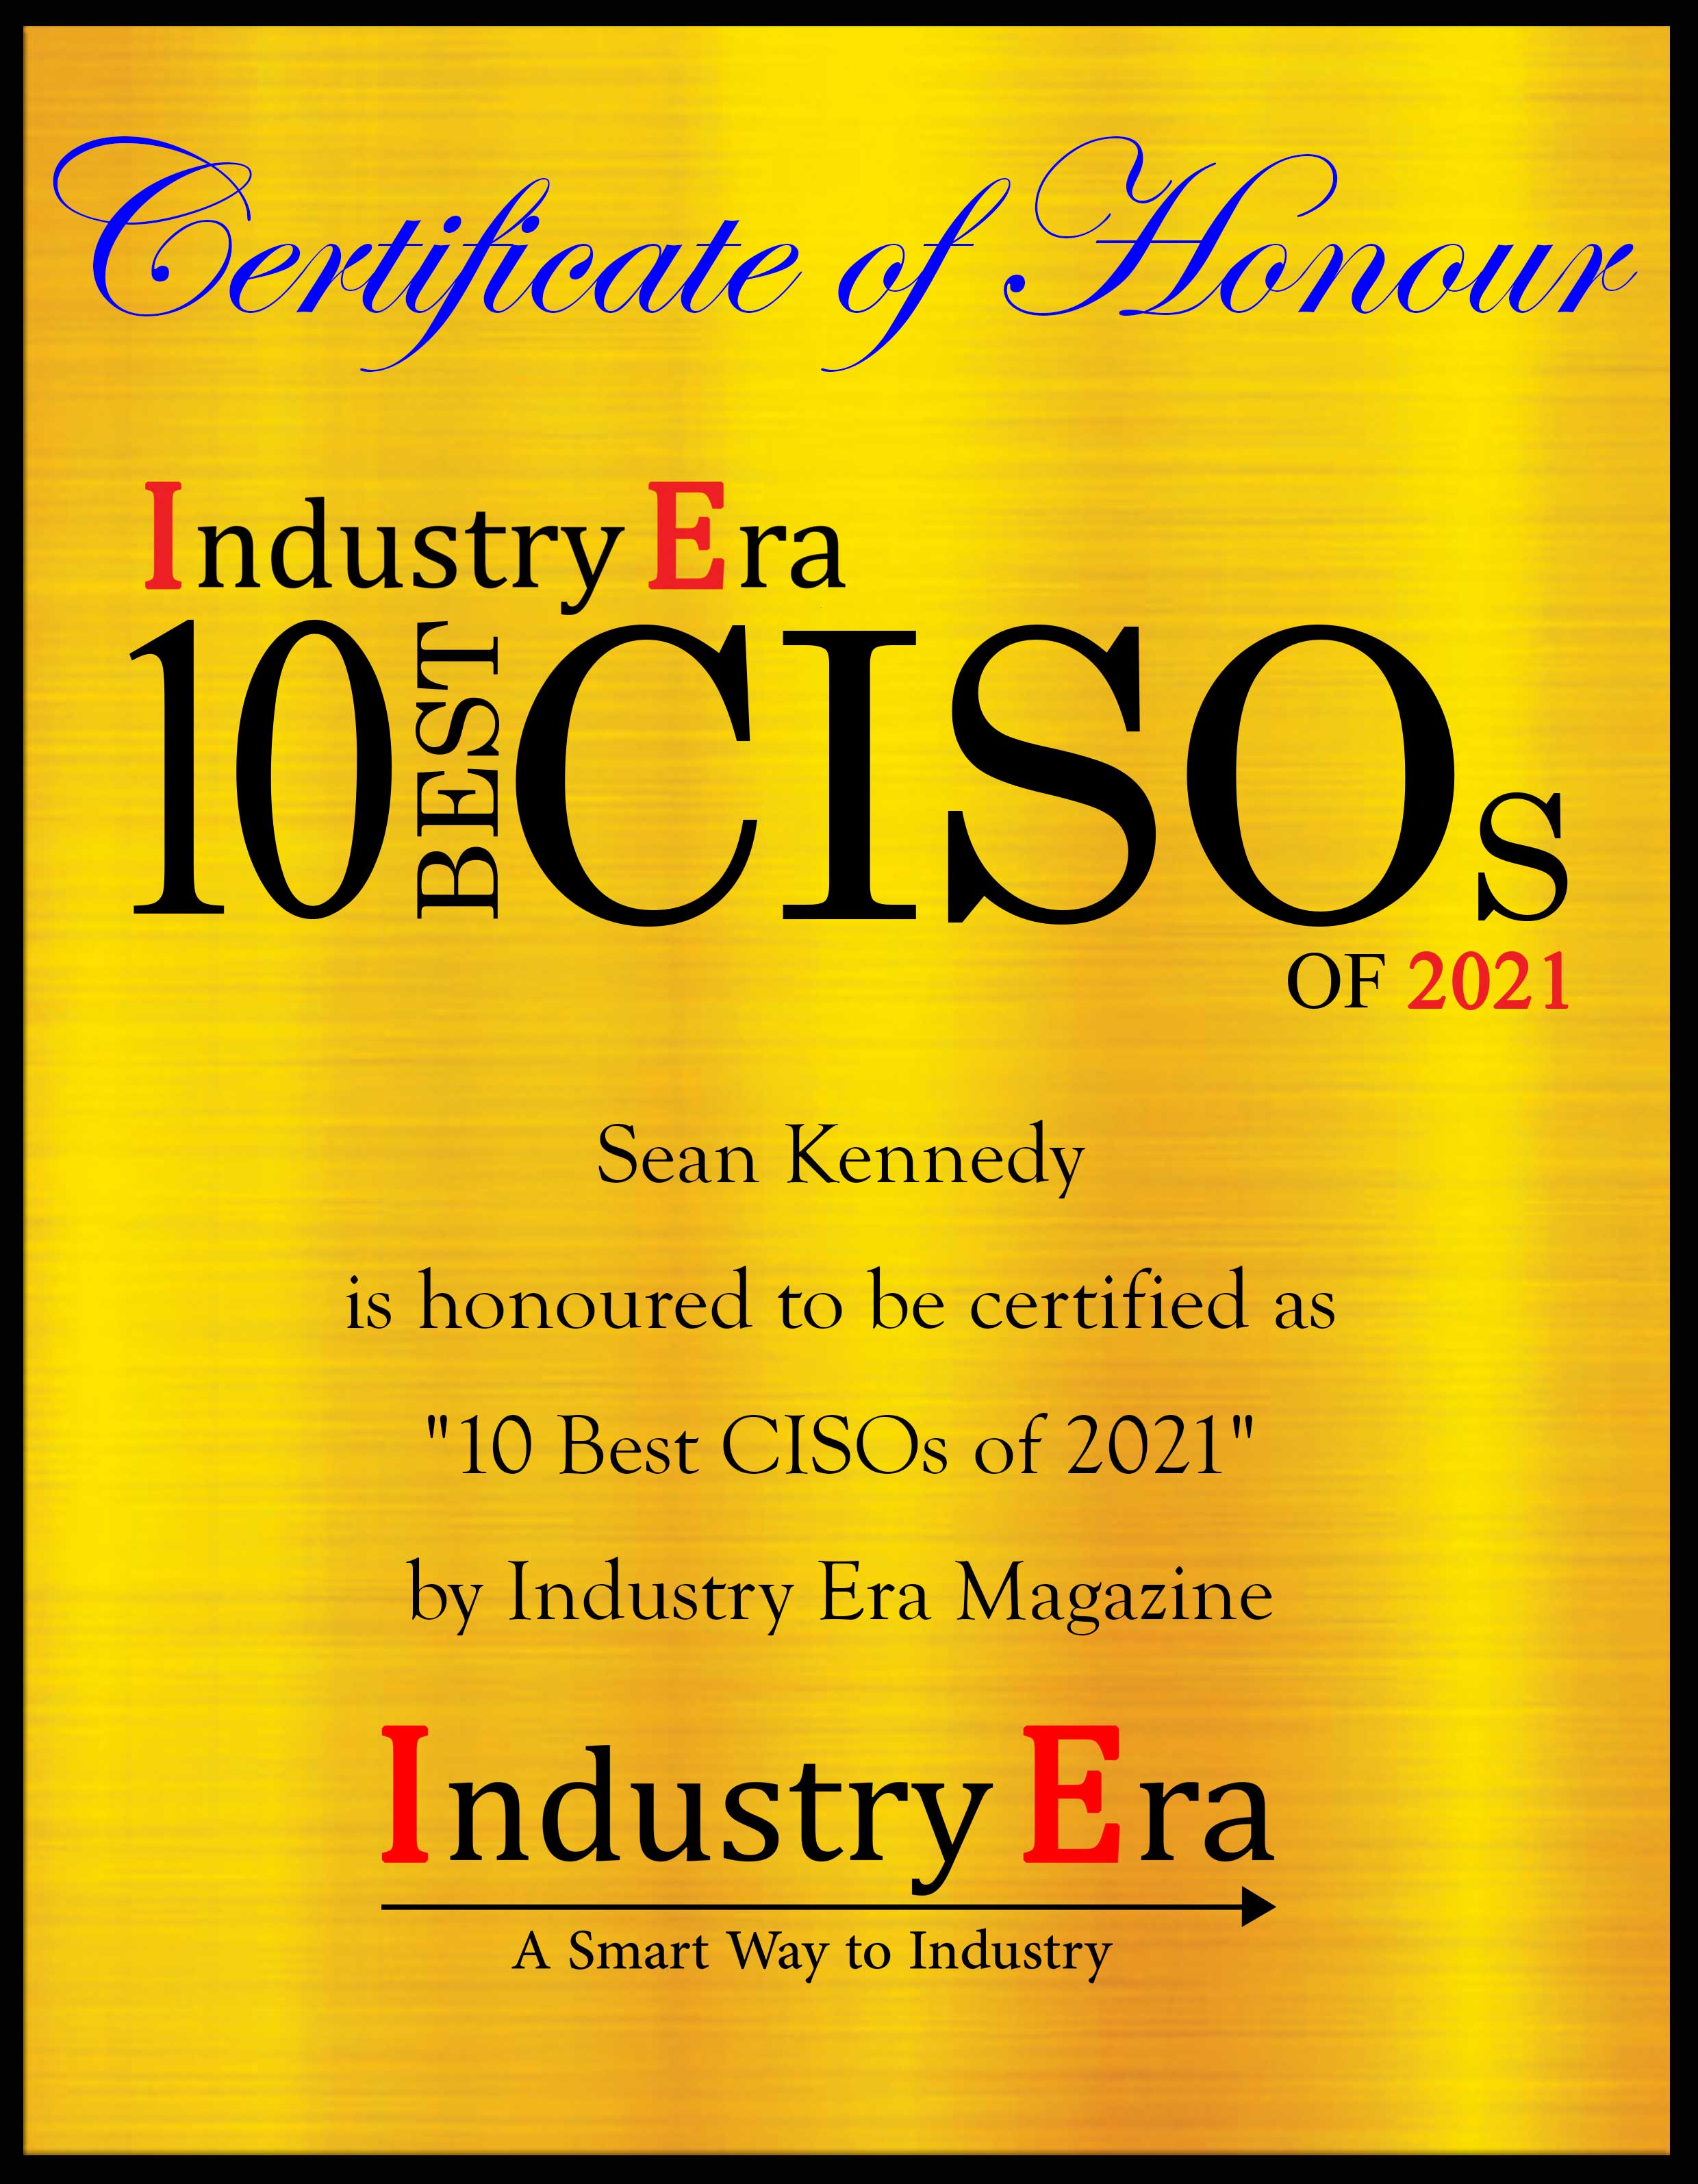 Sean Kennedy, Chief Information Security Officer of Patra Corporation Certificate